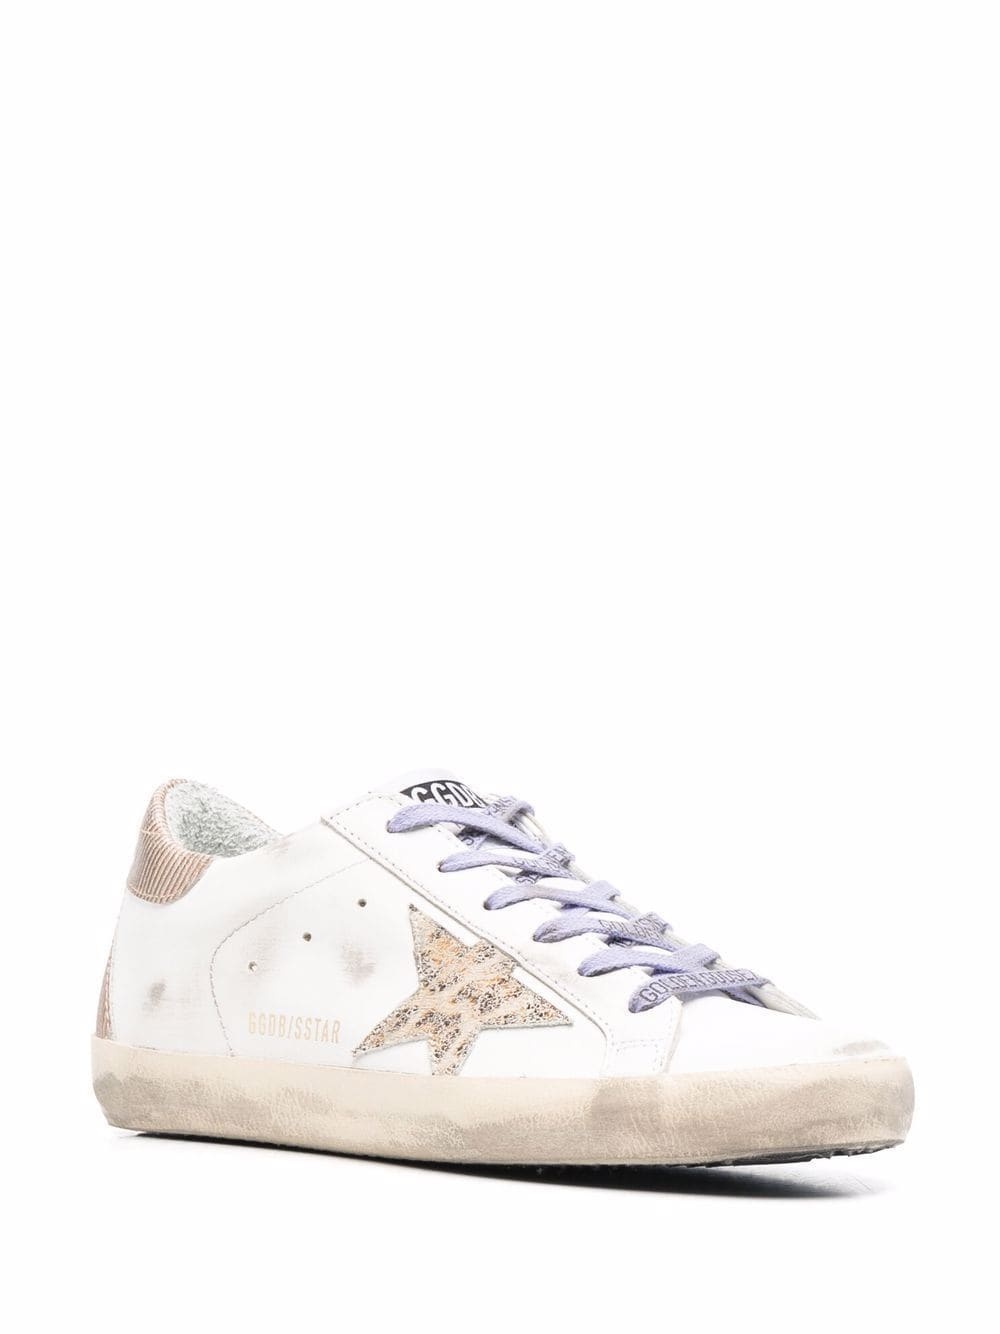 Golden Goose Deluxe Brand Shoes White Woman - 7